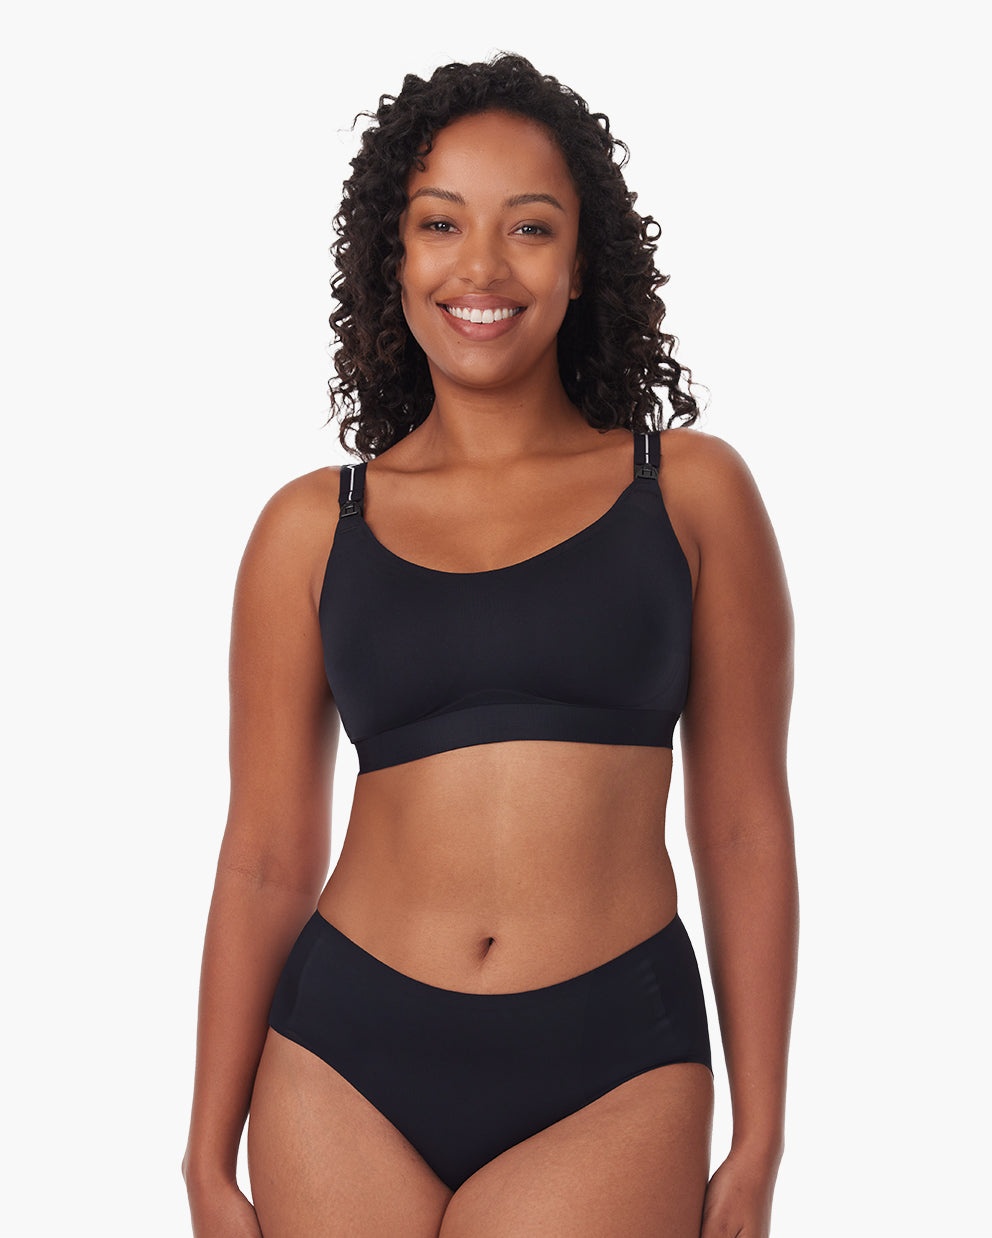 Medela 3 in 1 Nursing and Pumping Bra | Breathable, Lightweight for  Ultimate Comfort when Feeding, Electric Pumping or In-Bra Pumping, Chai,  Small